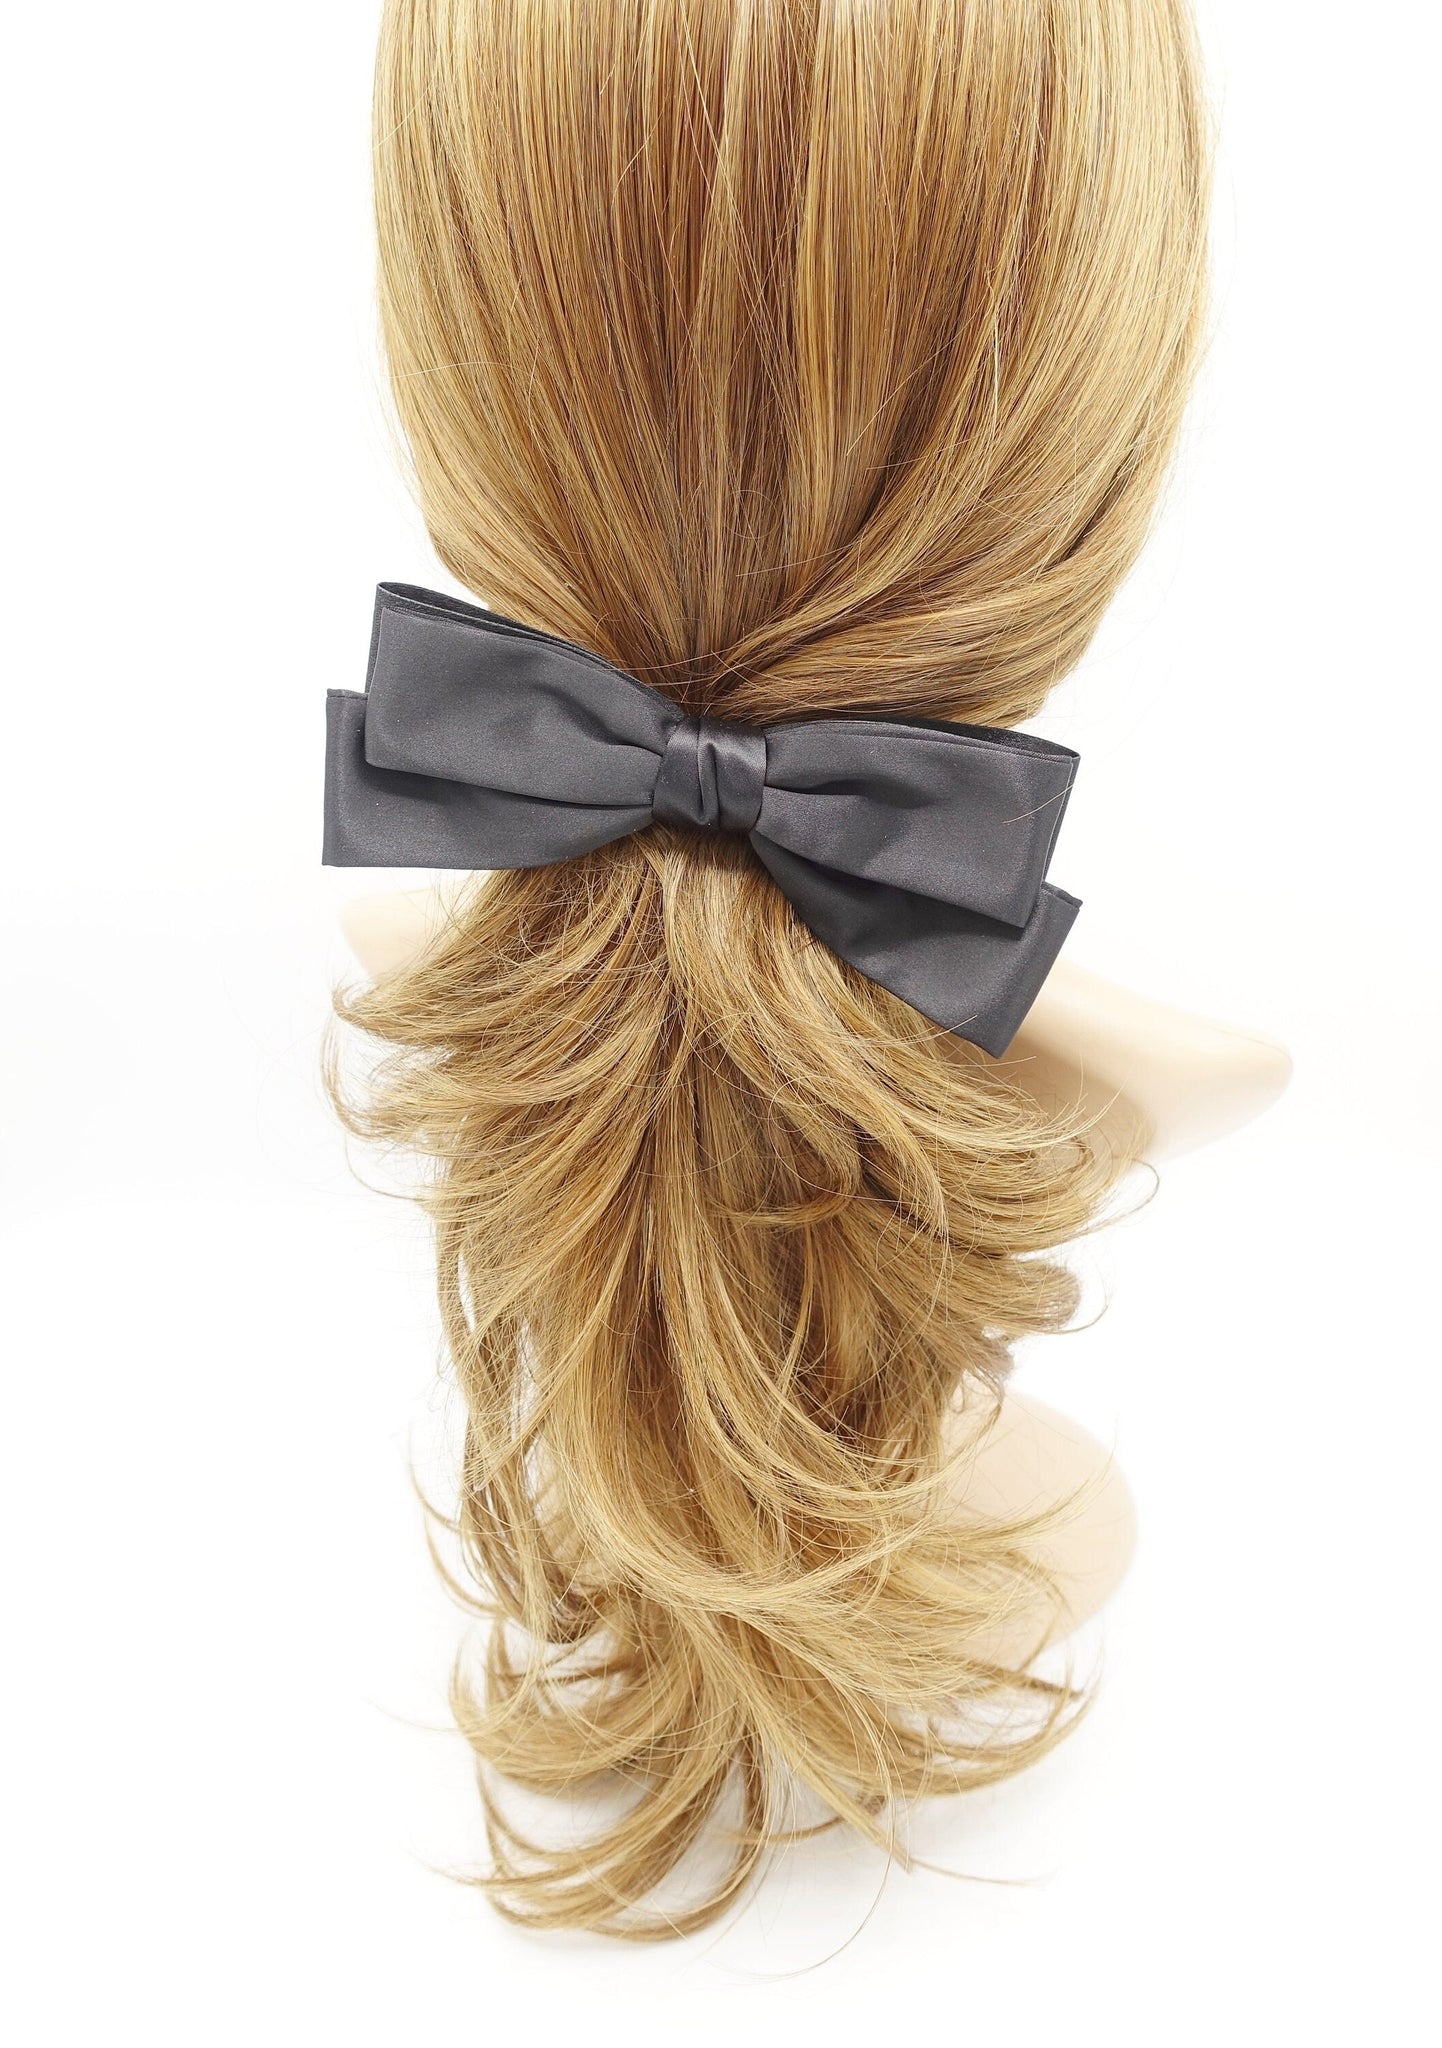 veryshine.com Barrette (Bow) Black satin double layered hair bow  triple wing narrow glossy style hair accessory for women